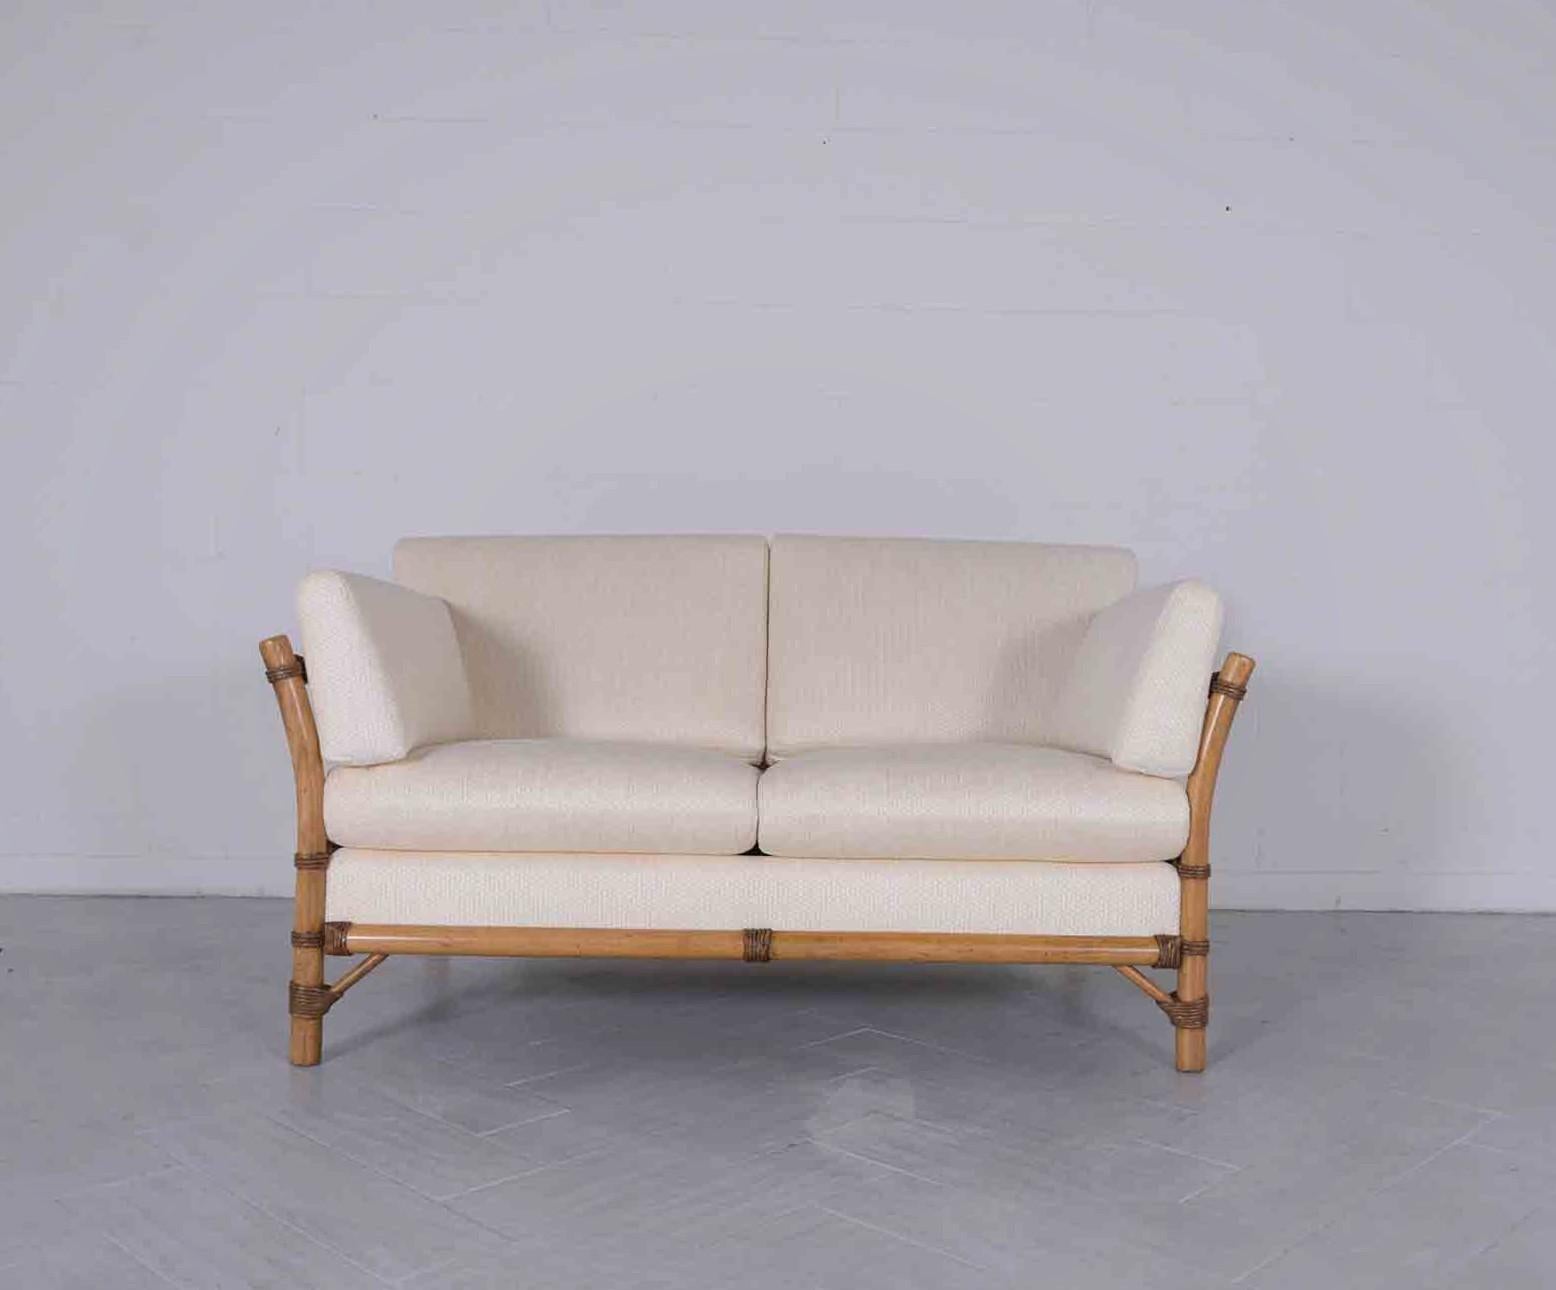 Introducing our extraordinary 1970s faux bamboo loveseat, handcrafted from wood and meticulously restored by our in-house team of professional craftsmen. In great condition, this vintage settee captivates with its light walnut stain, newly lacquered